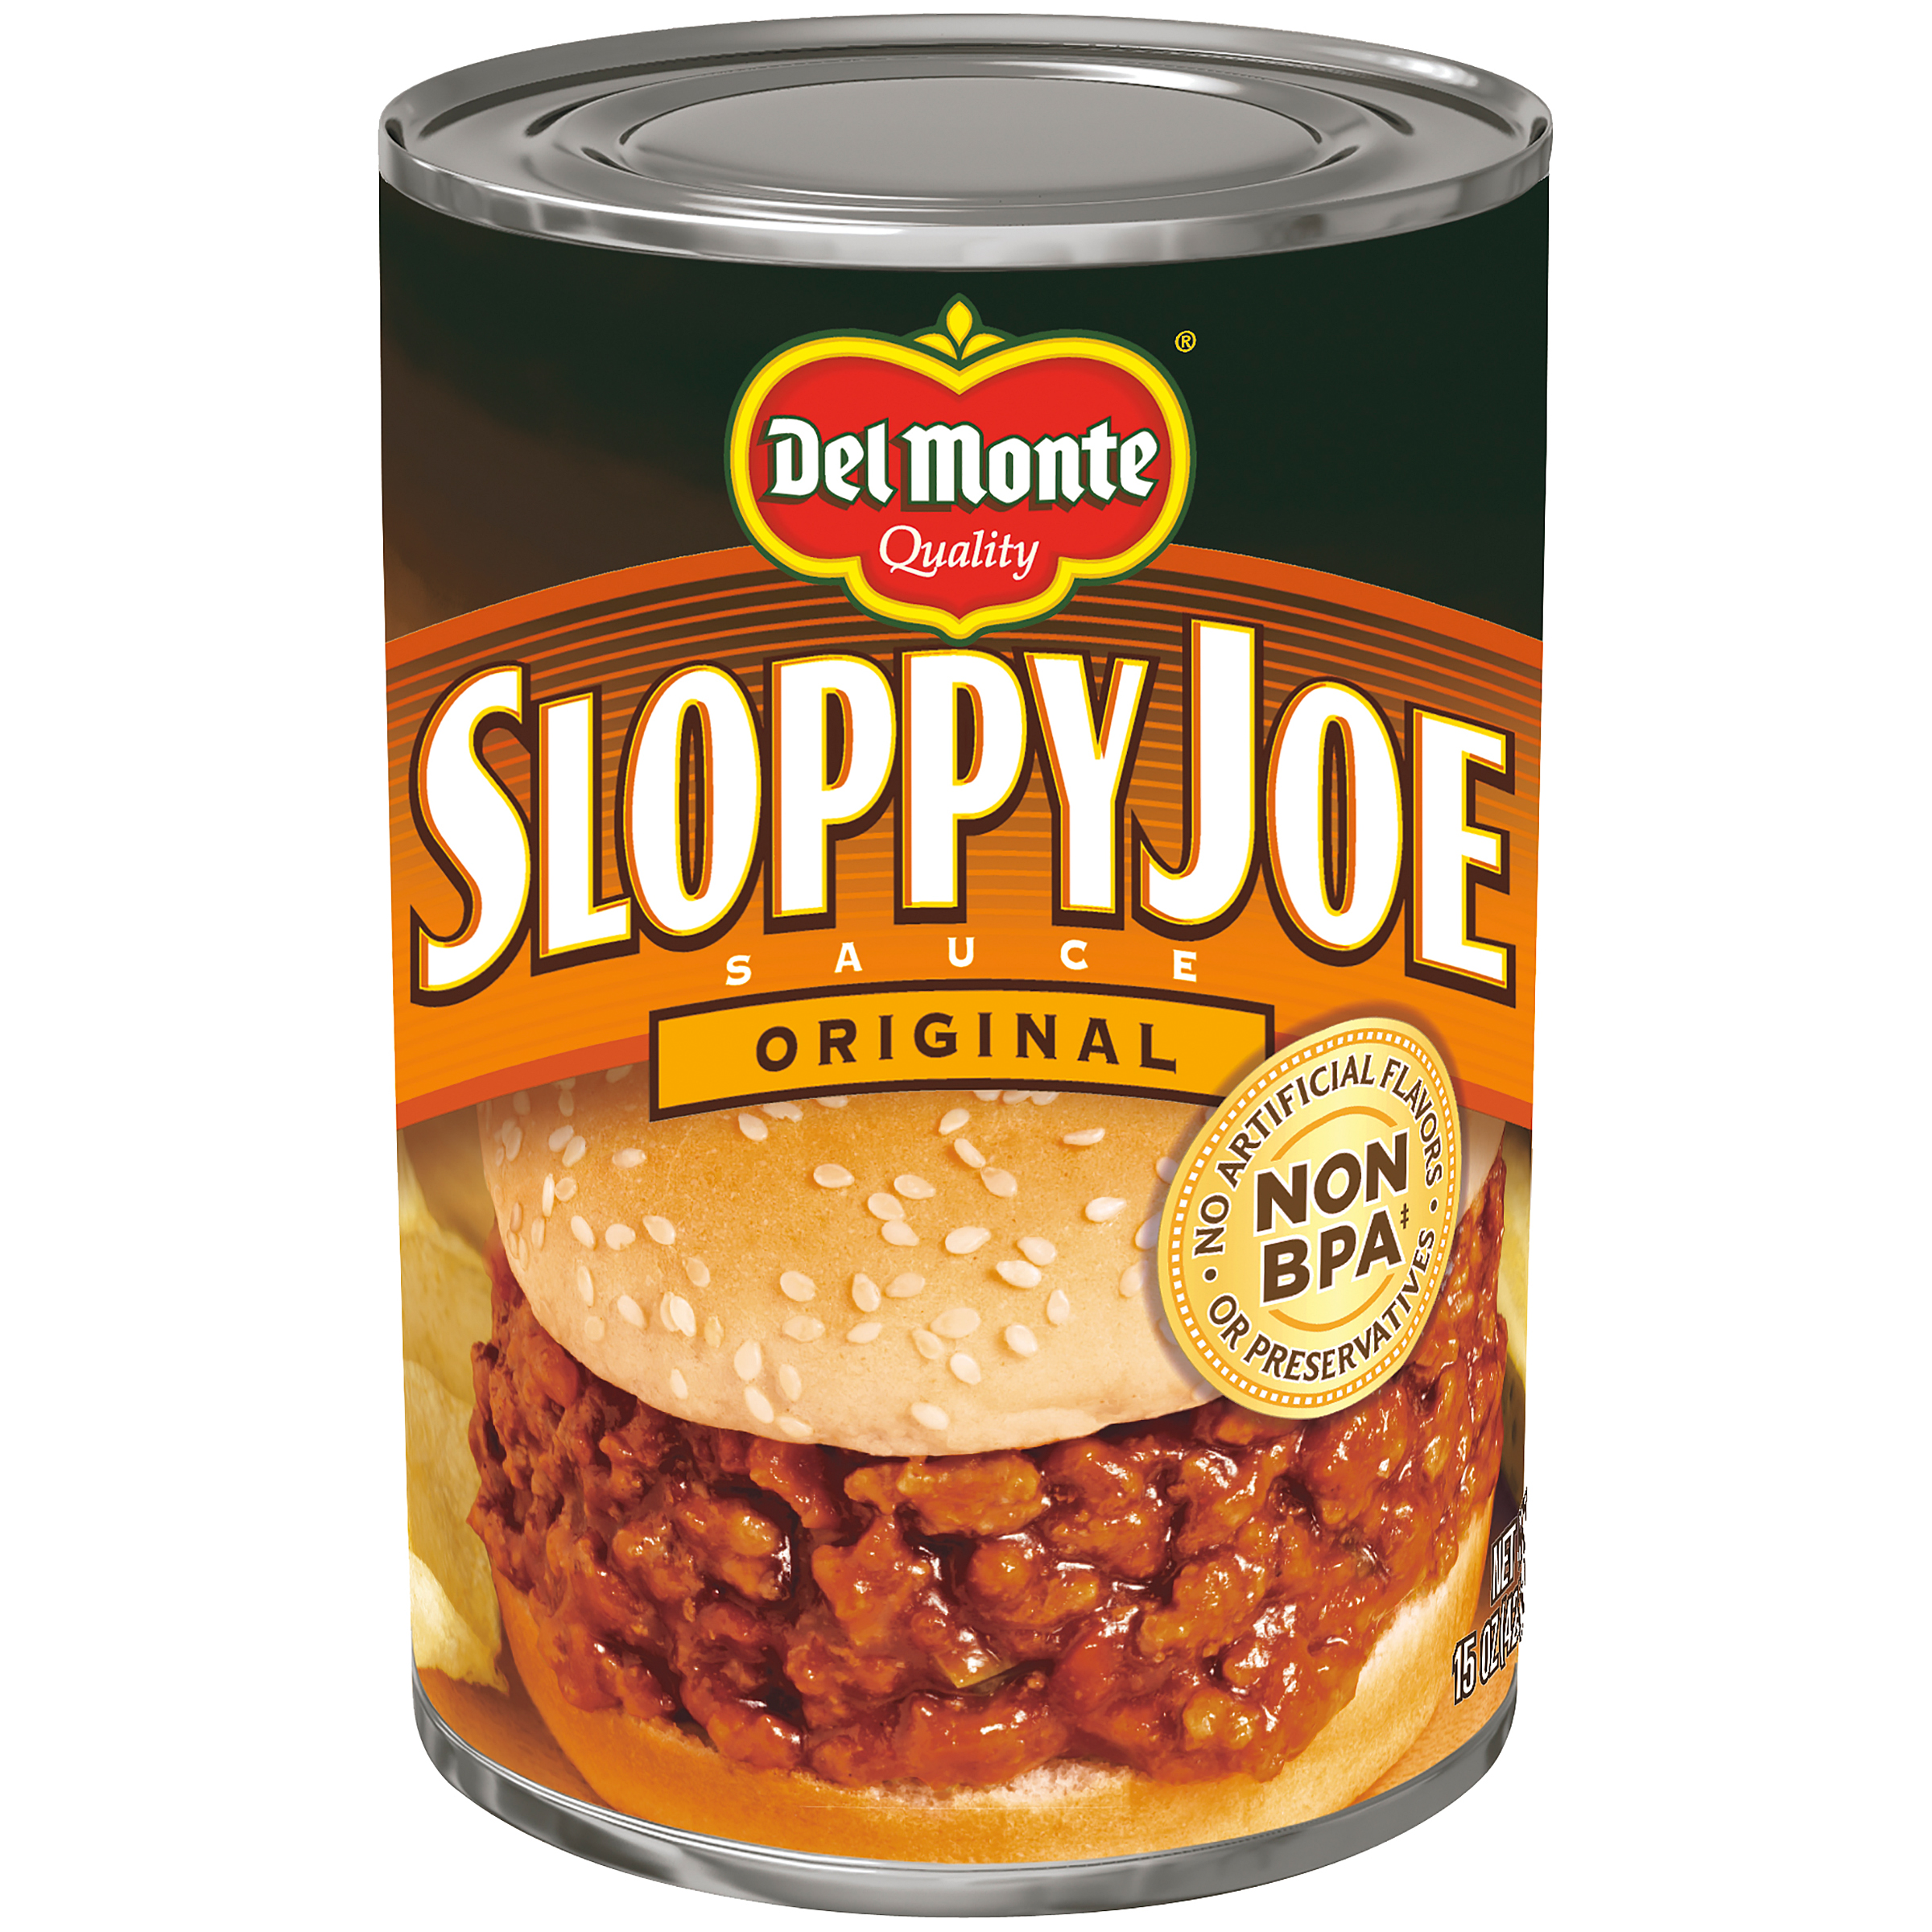 Sloppy monte canned